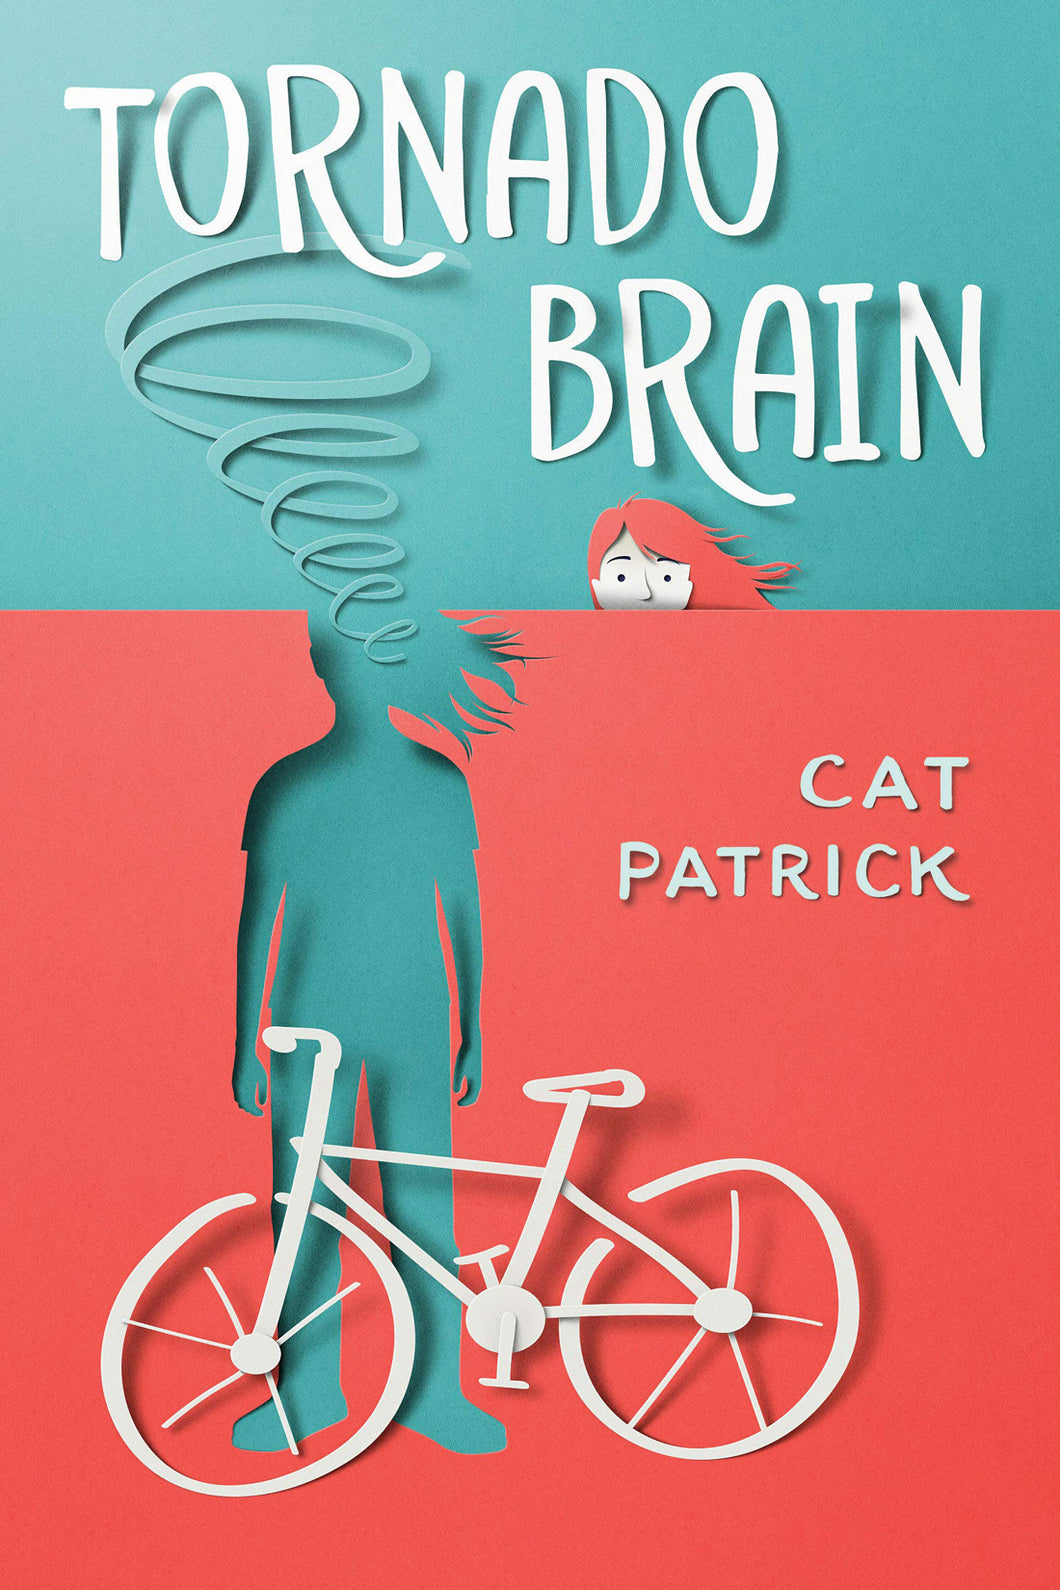 Tornado Brain by Cat Patrick / Hardcover or Paperback - NEW BOOK